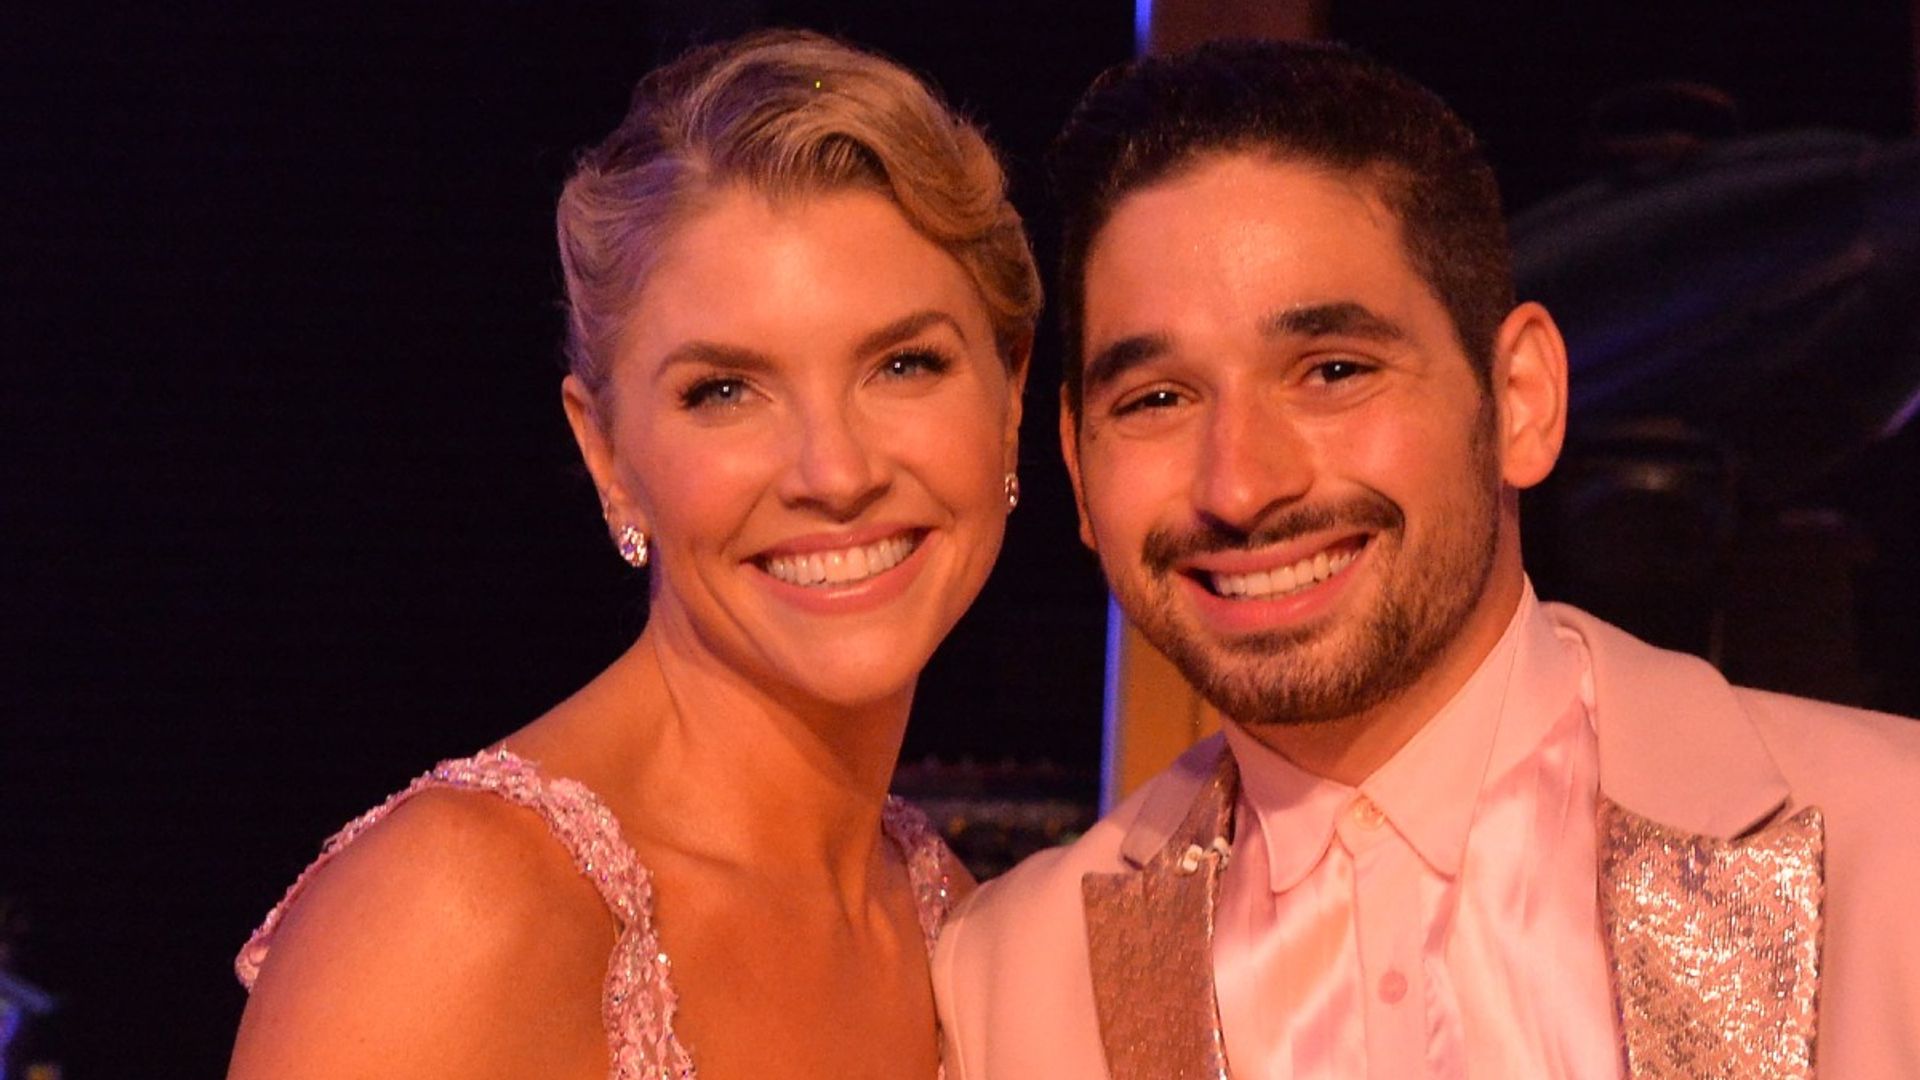 Dancing With The Stars Who went home and who topped the leaderboard